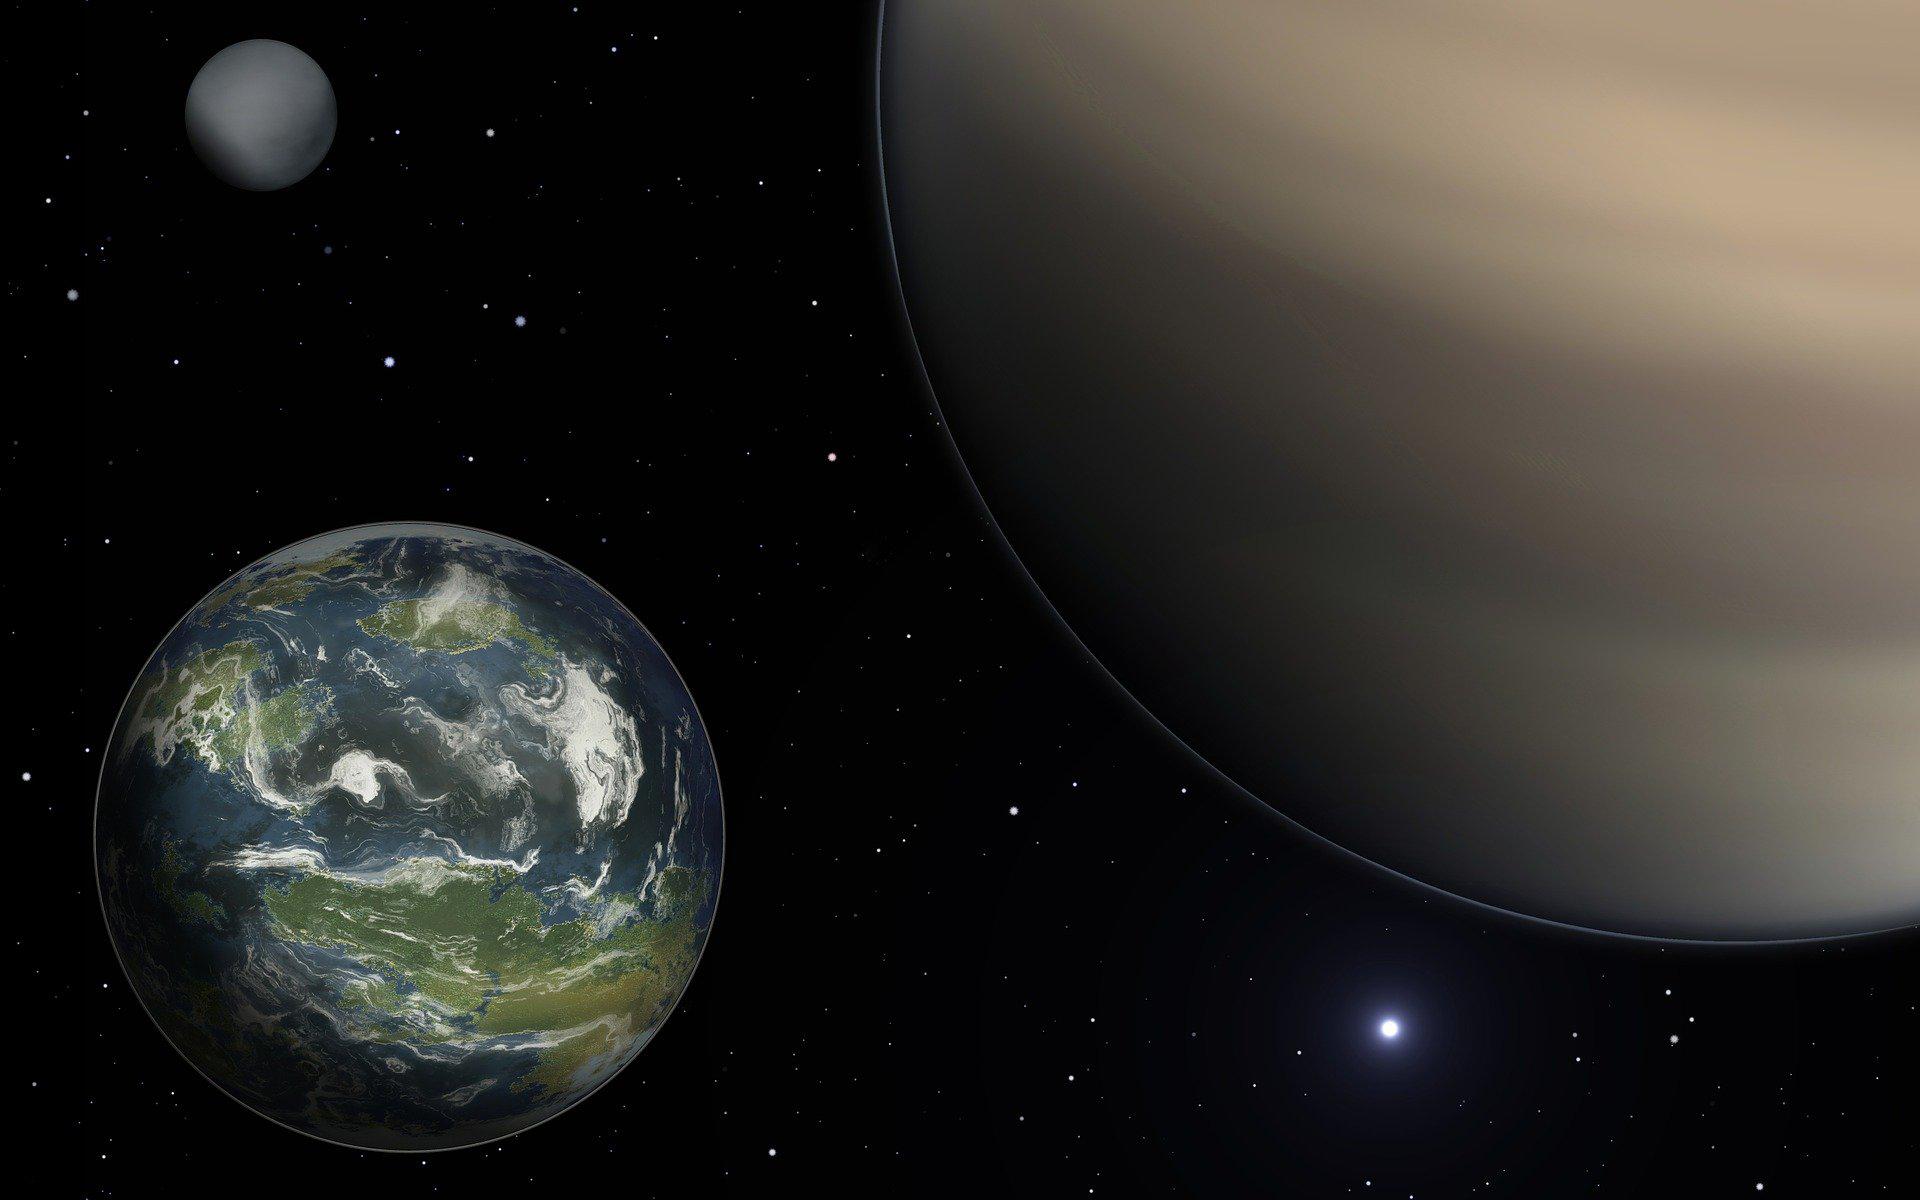 Scientists want to find planets similar to ours - with conditions to harbor life (Source: Pixabay/ChadoNihi)